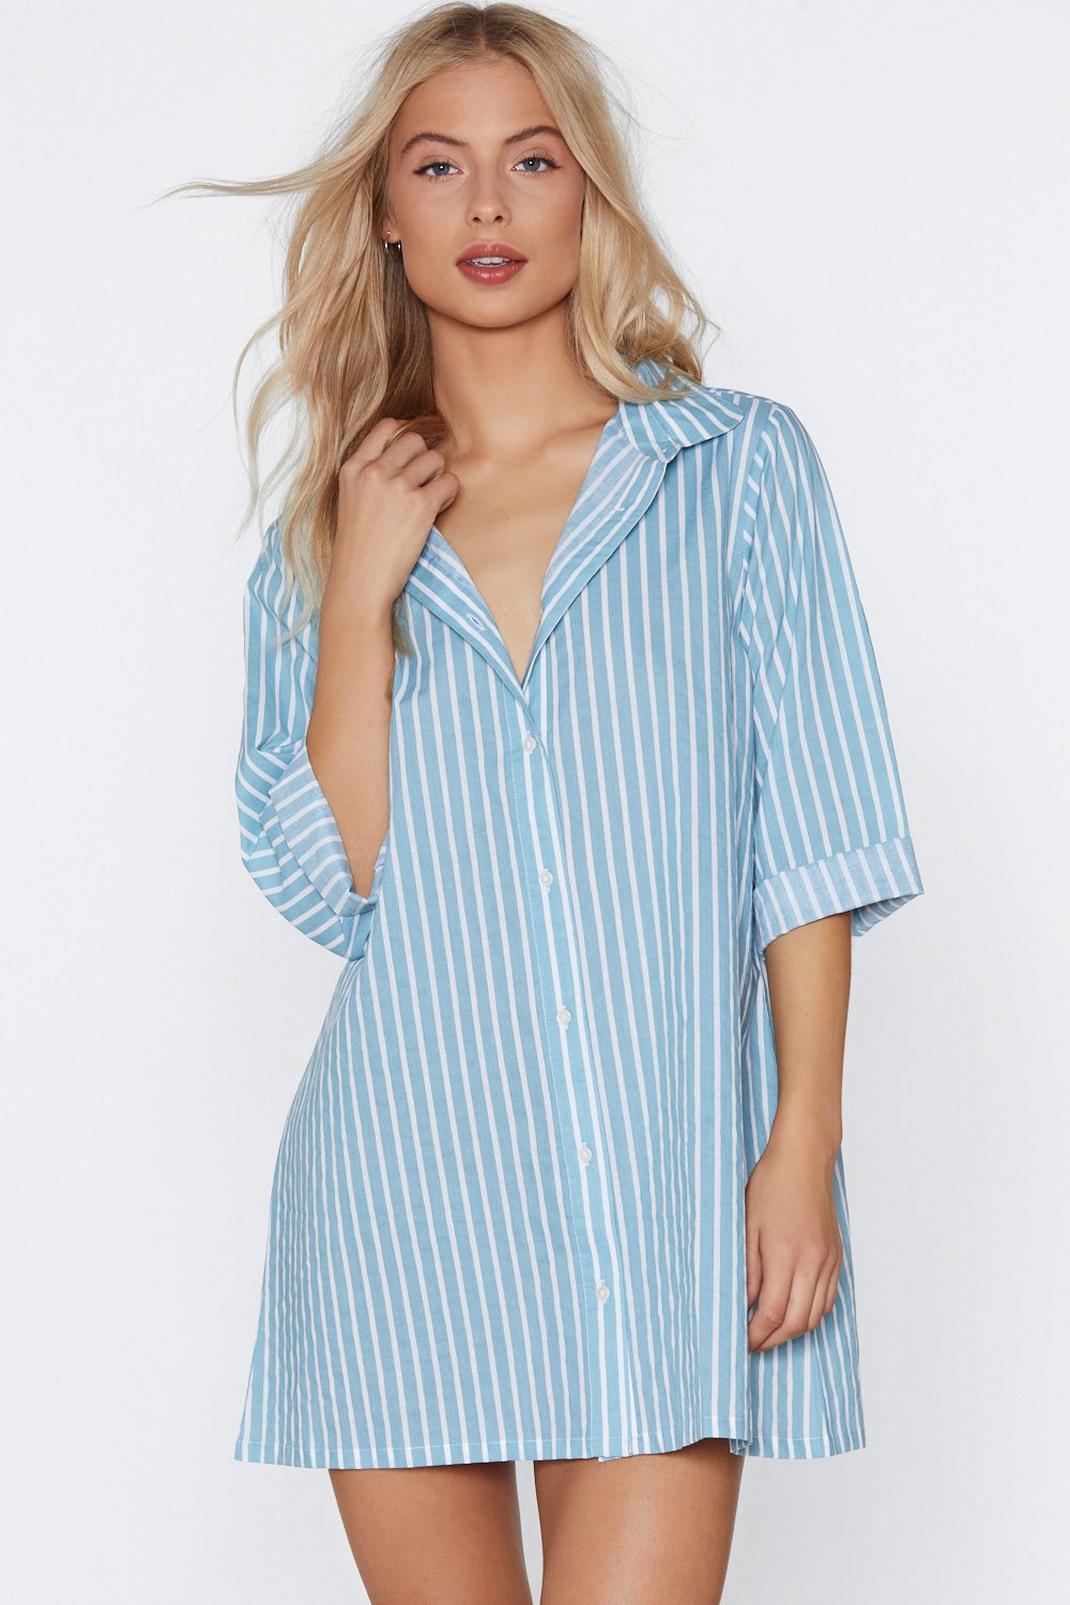 Only in Dreams Striped Pajama Shirt image number 1